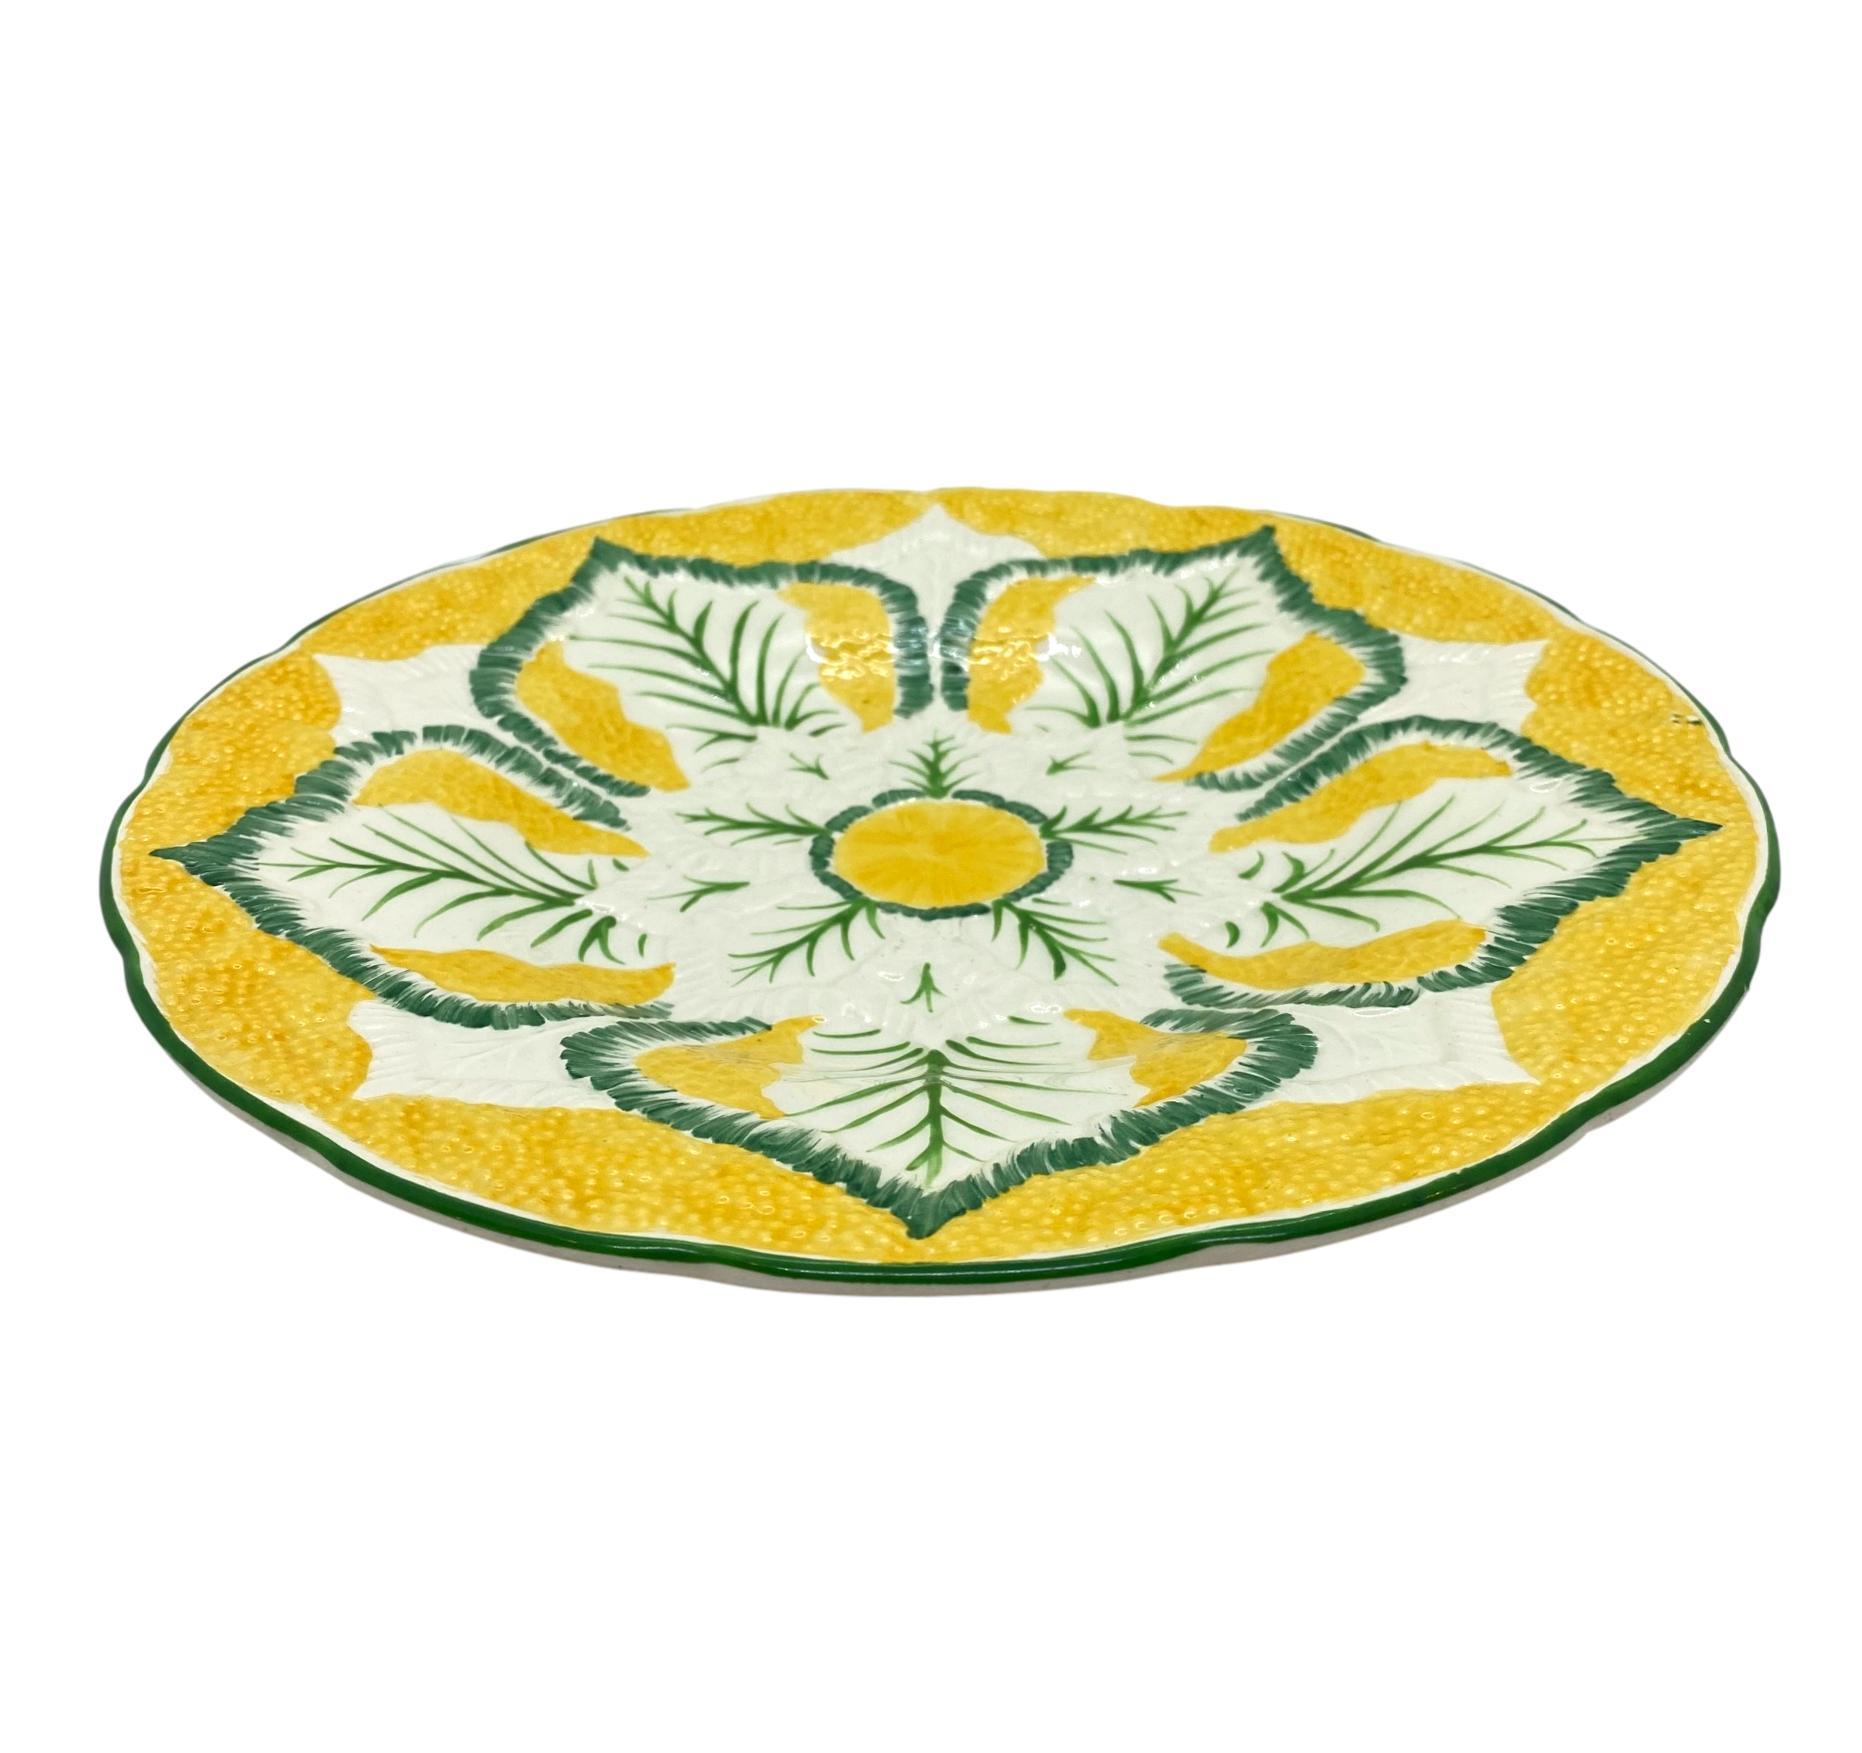 Wedgwood Majolica cauliflower pattern 9-in plate, molded as a stylized blooming cauliflower, on a vividly glazed yellow ground, the reverse with impressed marks: 'WEDGWOOD' and the firm's date code for November 1923,
English.
For nearly 30 years